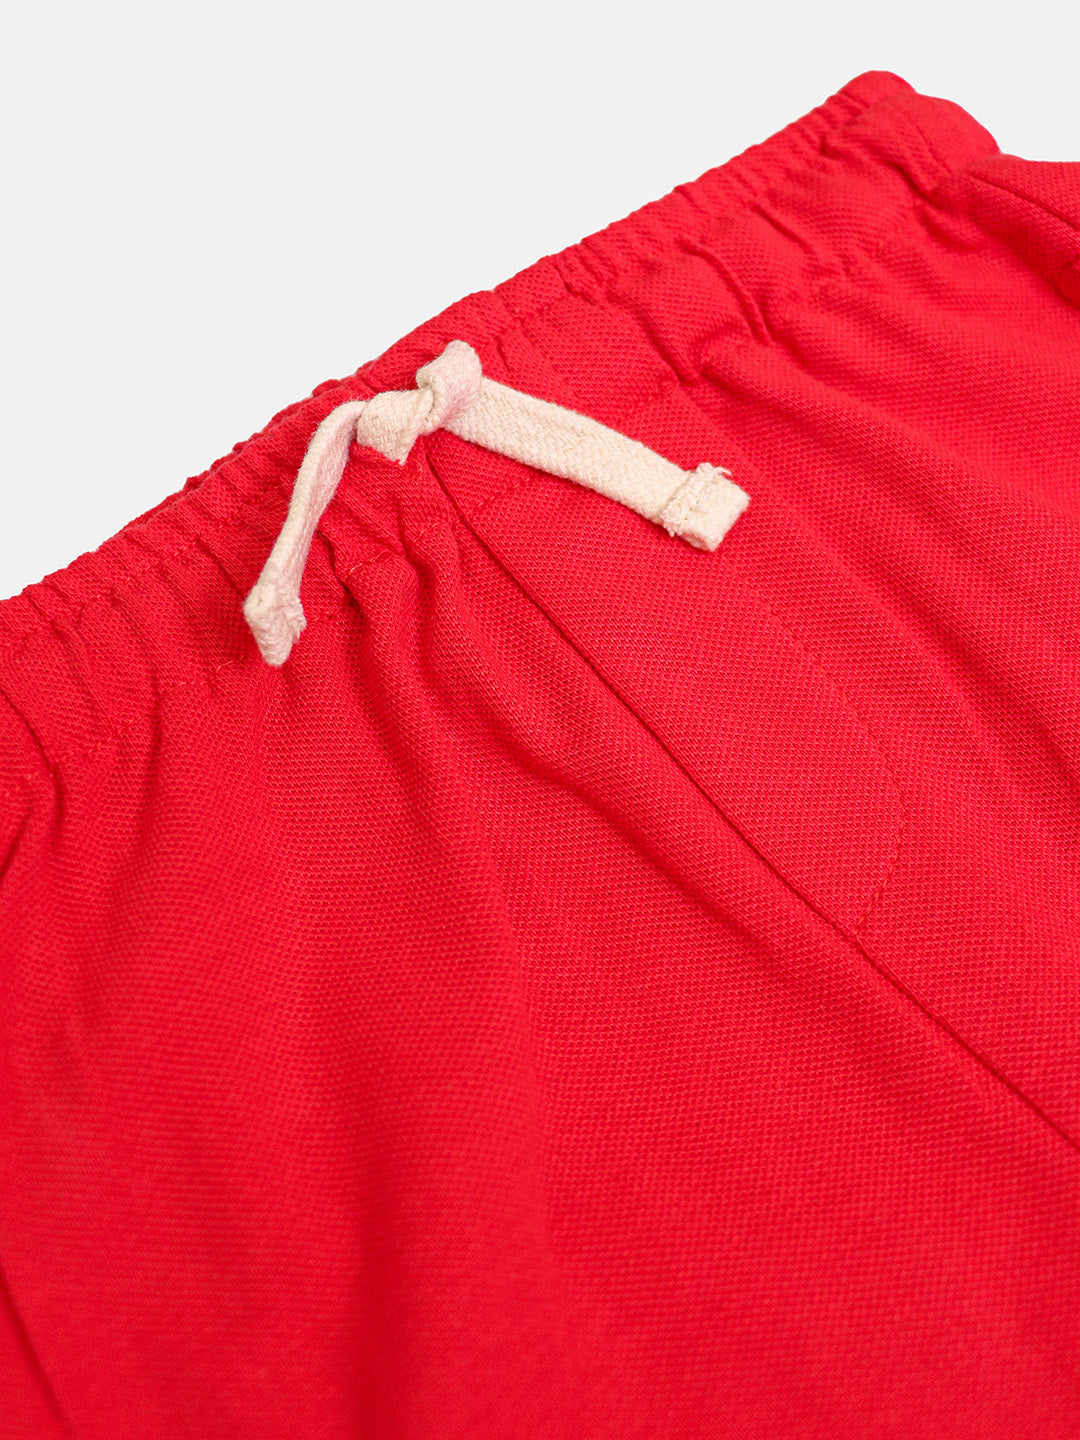 Boys Cotton Shorts Combo- Red, Yellow, Blue